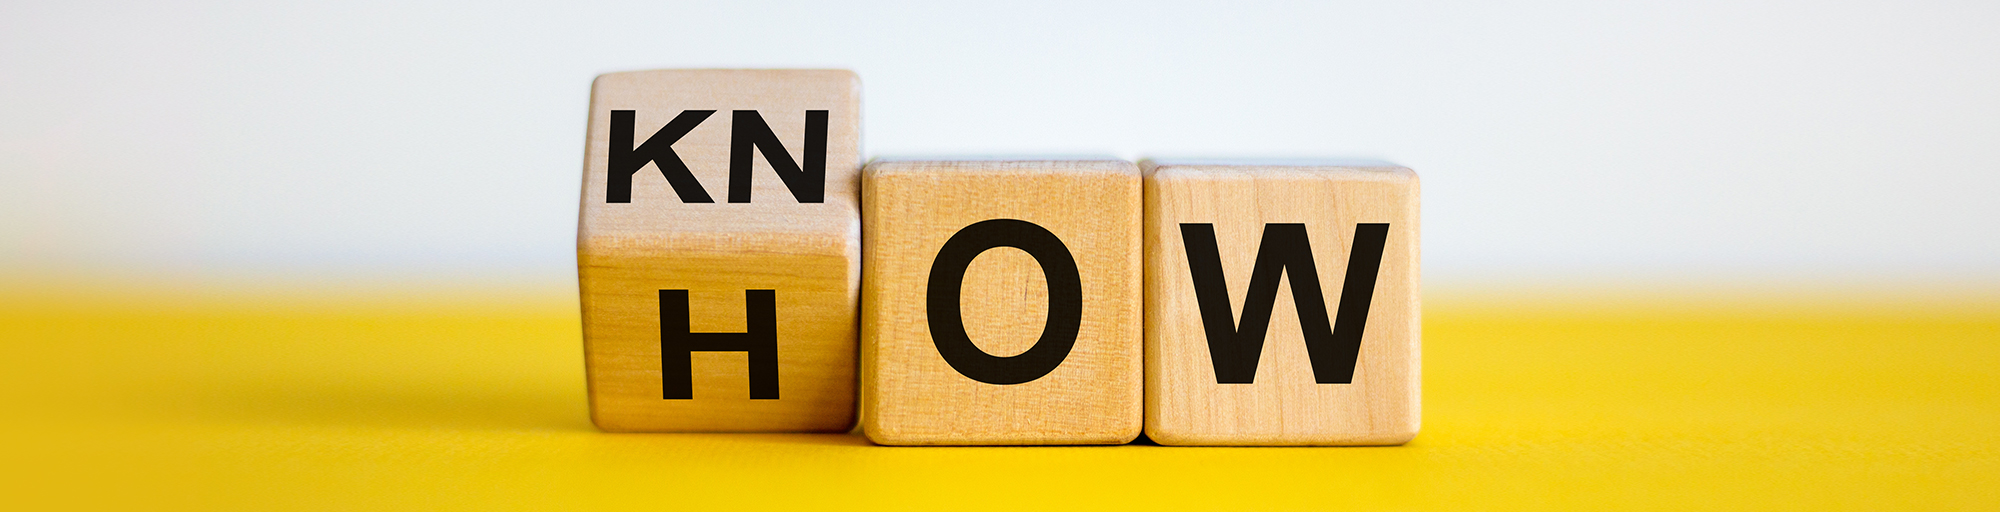 Three wooden blocks on a yellow background spelling out “Know How”